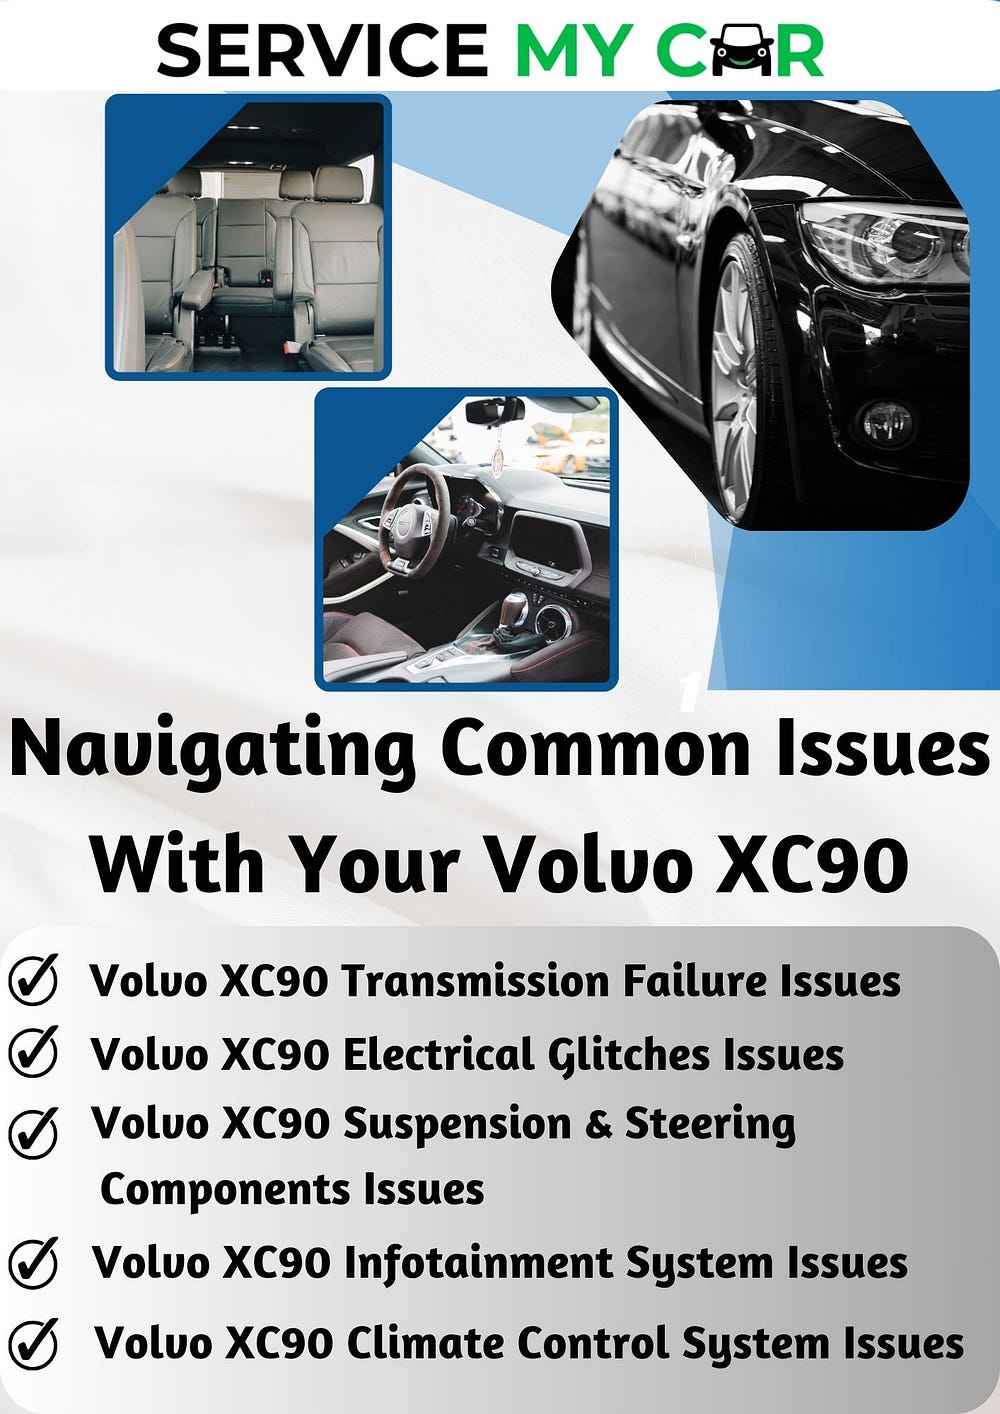 Navigating Common Issues with Your Volvo XC90